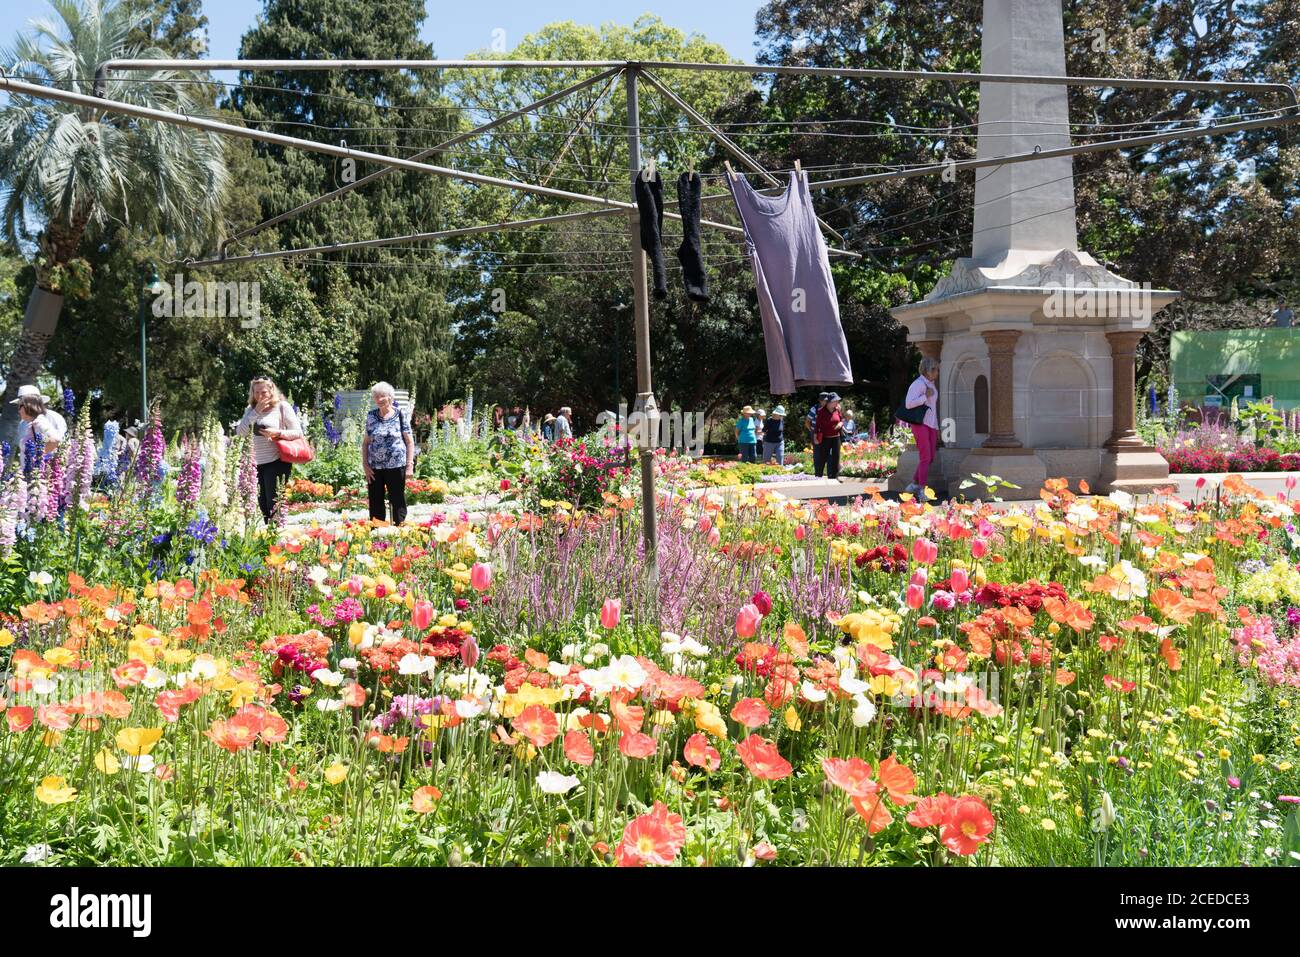 Visitors enjoying the novelty garden display of poppies and clothesline in Queens Park, Toowoomba, during the Carnival of Flowers Stock Photo